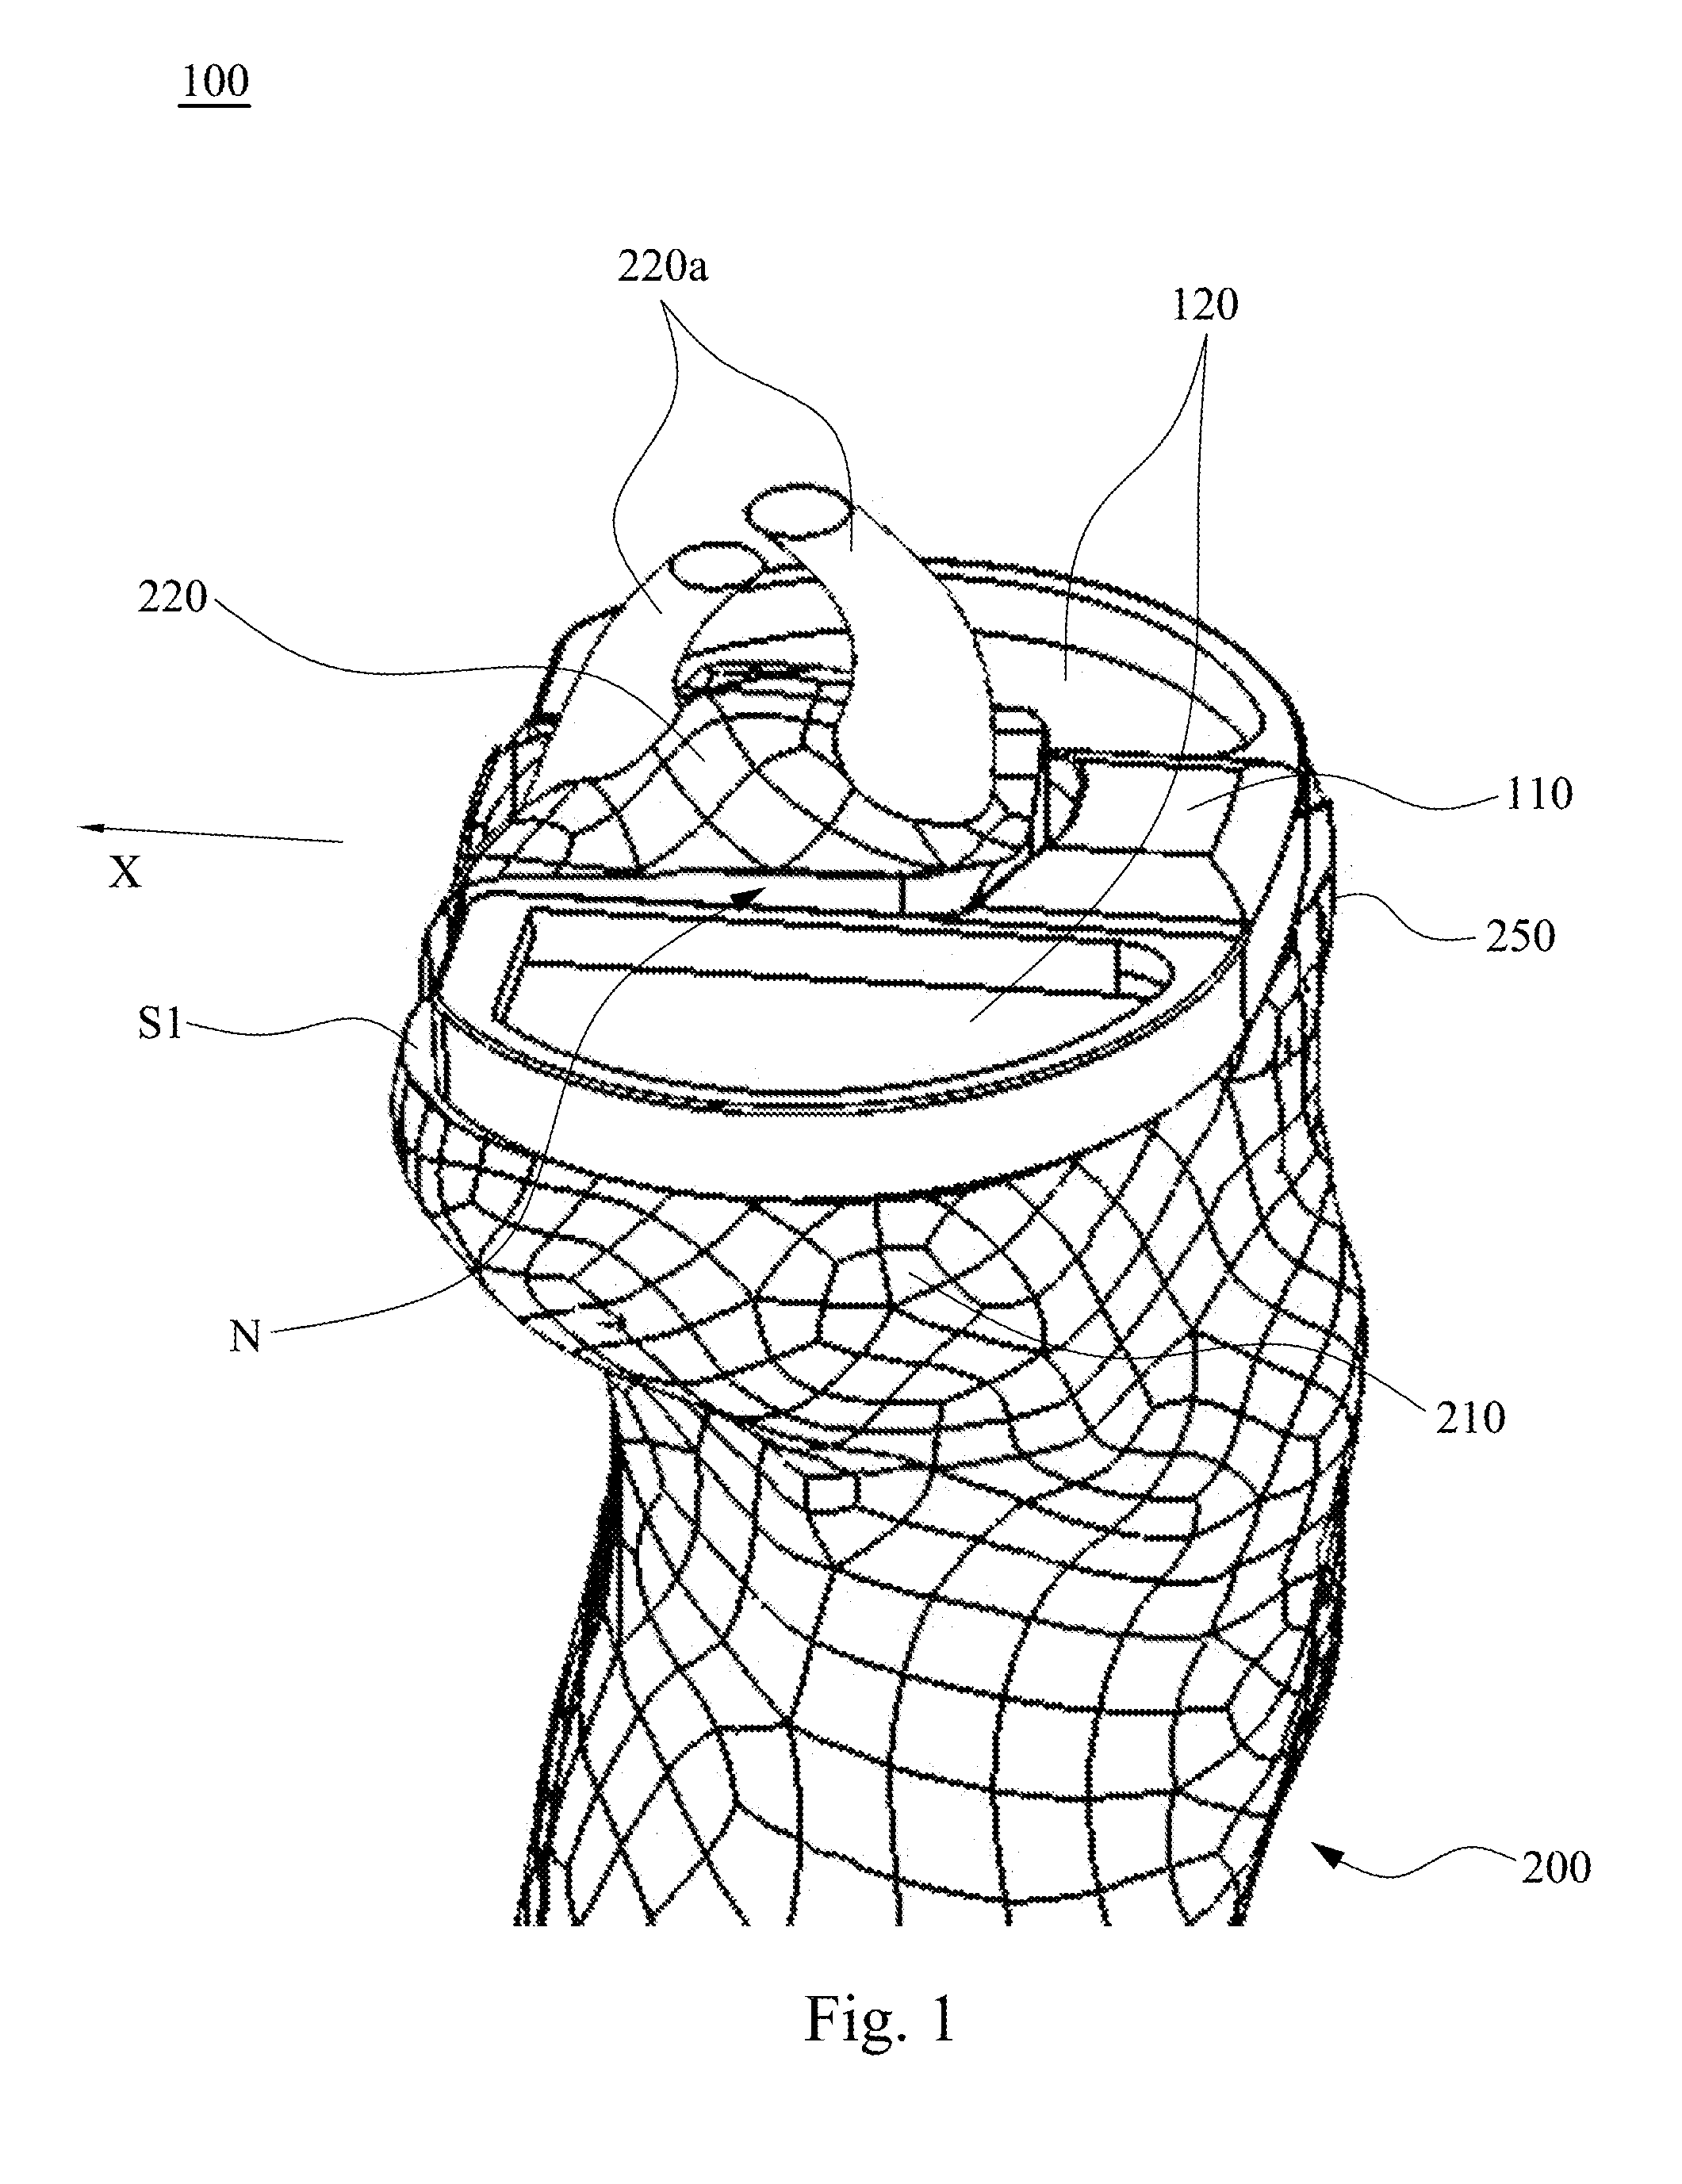 Tibial base plate and method for attaching a tibial base plate on a tibia